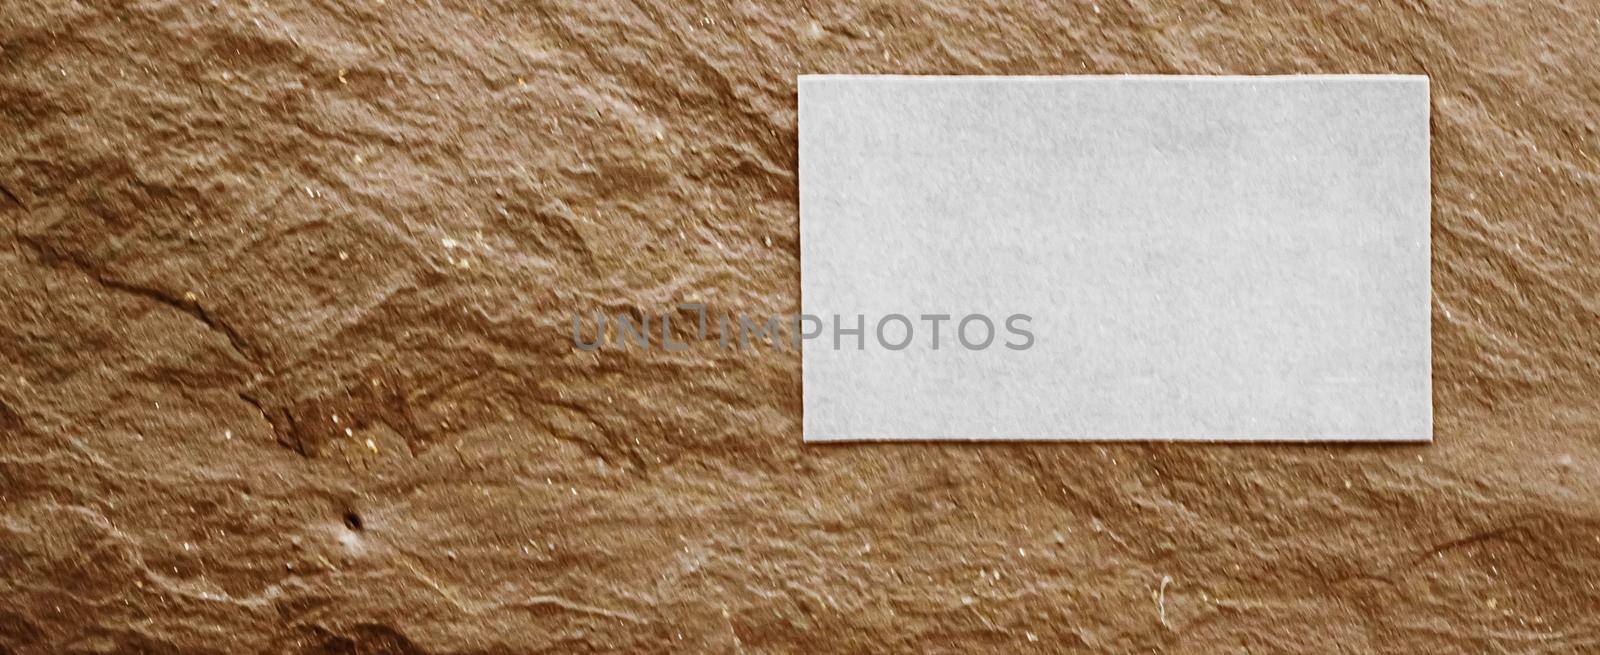 White business card flatlay on brown stone background, luxury branding flat lay and brand identity design for mockup by Anneleven